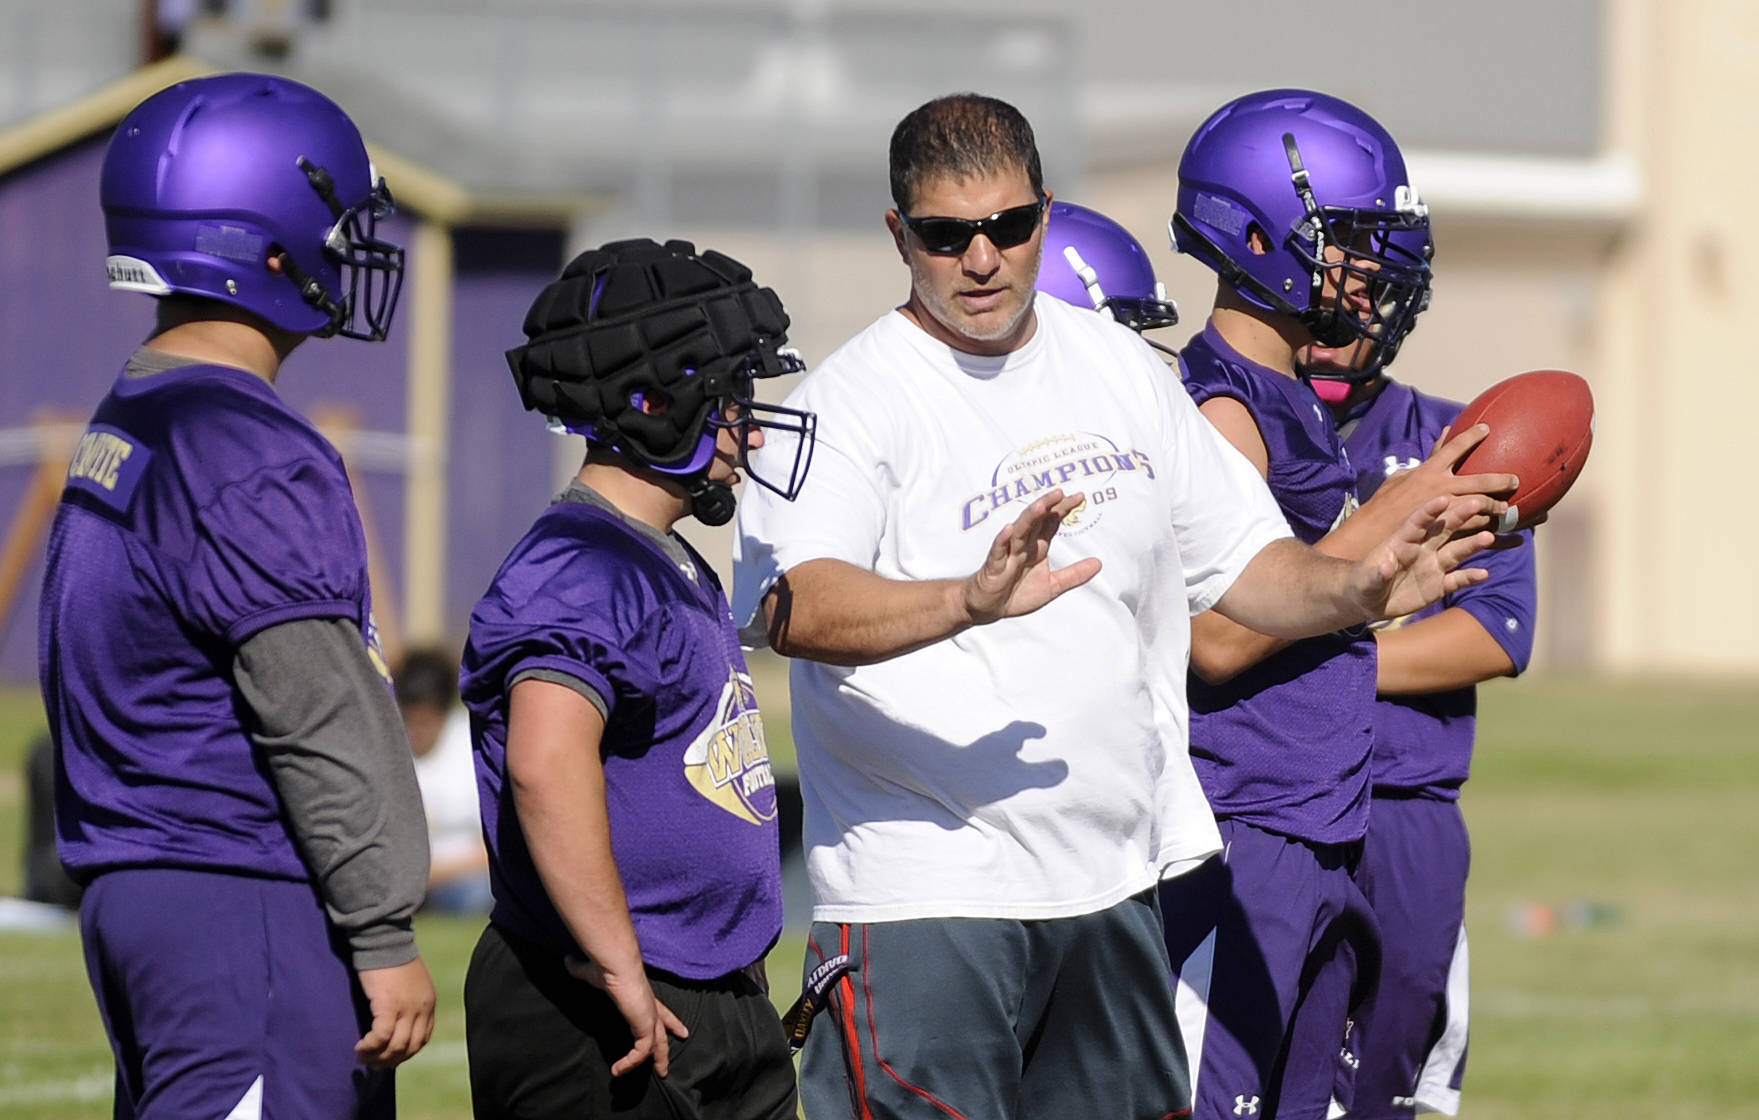 Sequim head coach Erik Wiker talks with players at Sequim High School’s first football practice on Aug. 16. The Wolves are scheduled to open their season Sept. 8 at Monetesano, after a Sept. 1 matchup against the Port Townsend Redhawks was canceled.